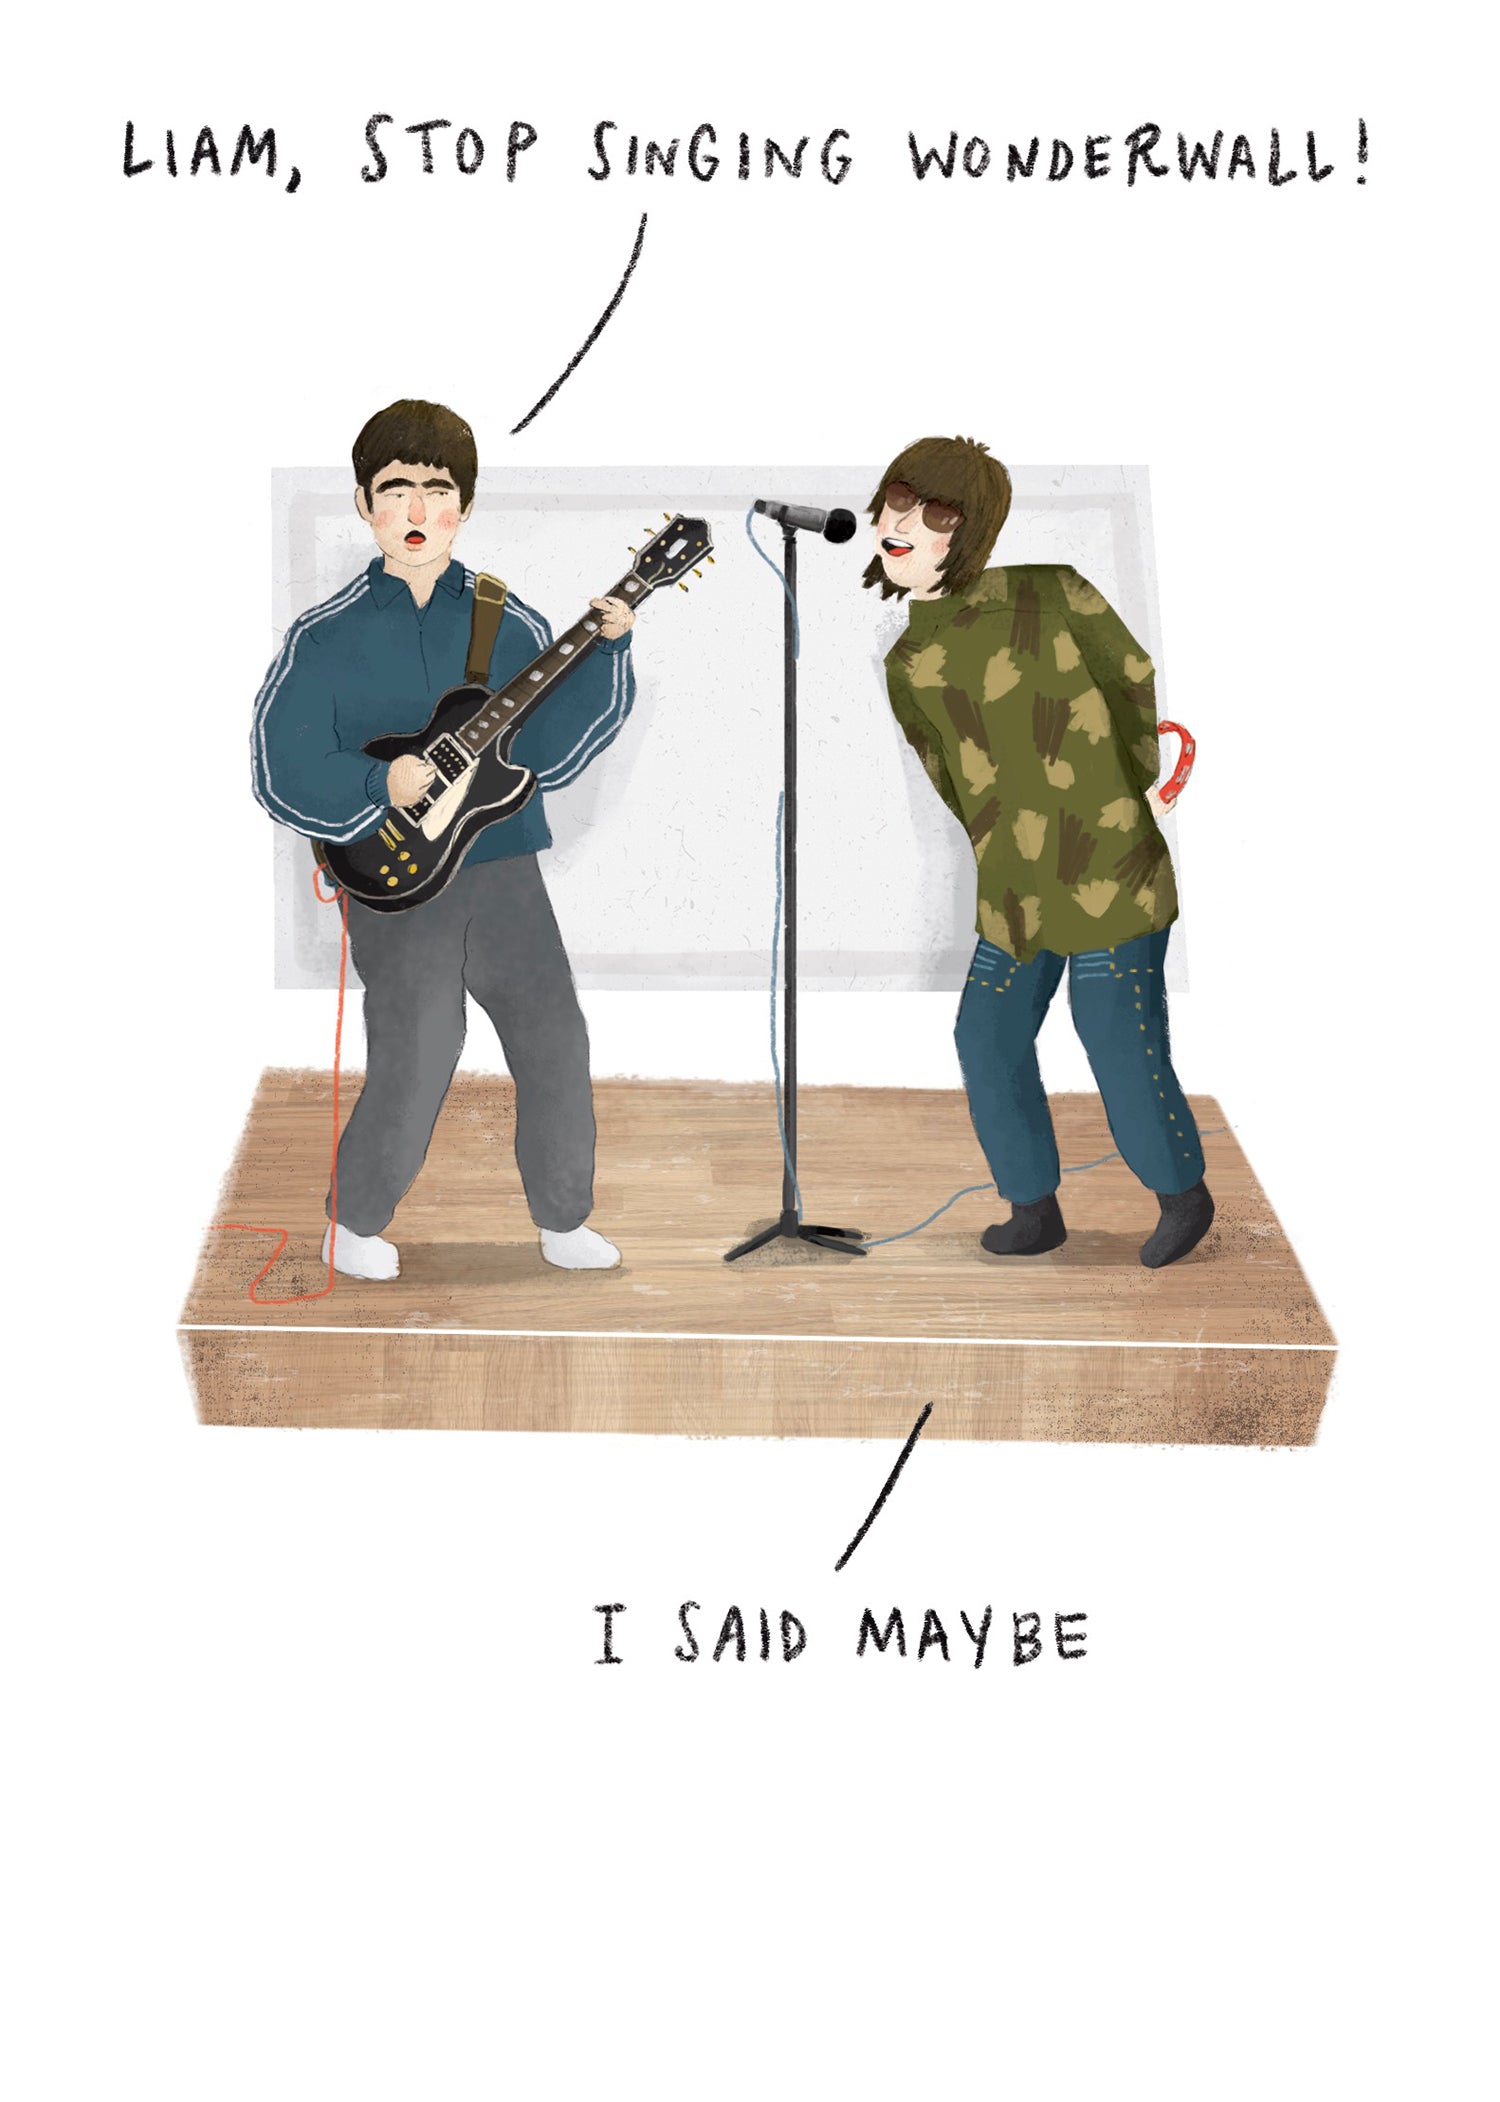 Wonderwall Oasis Funny Card from Penny Black